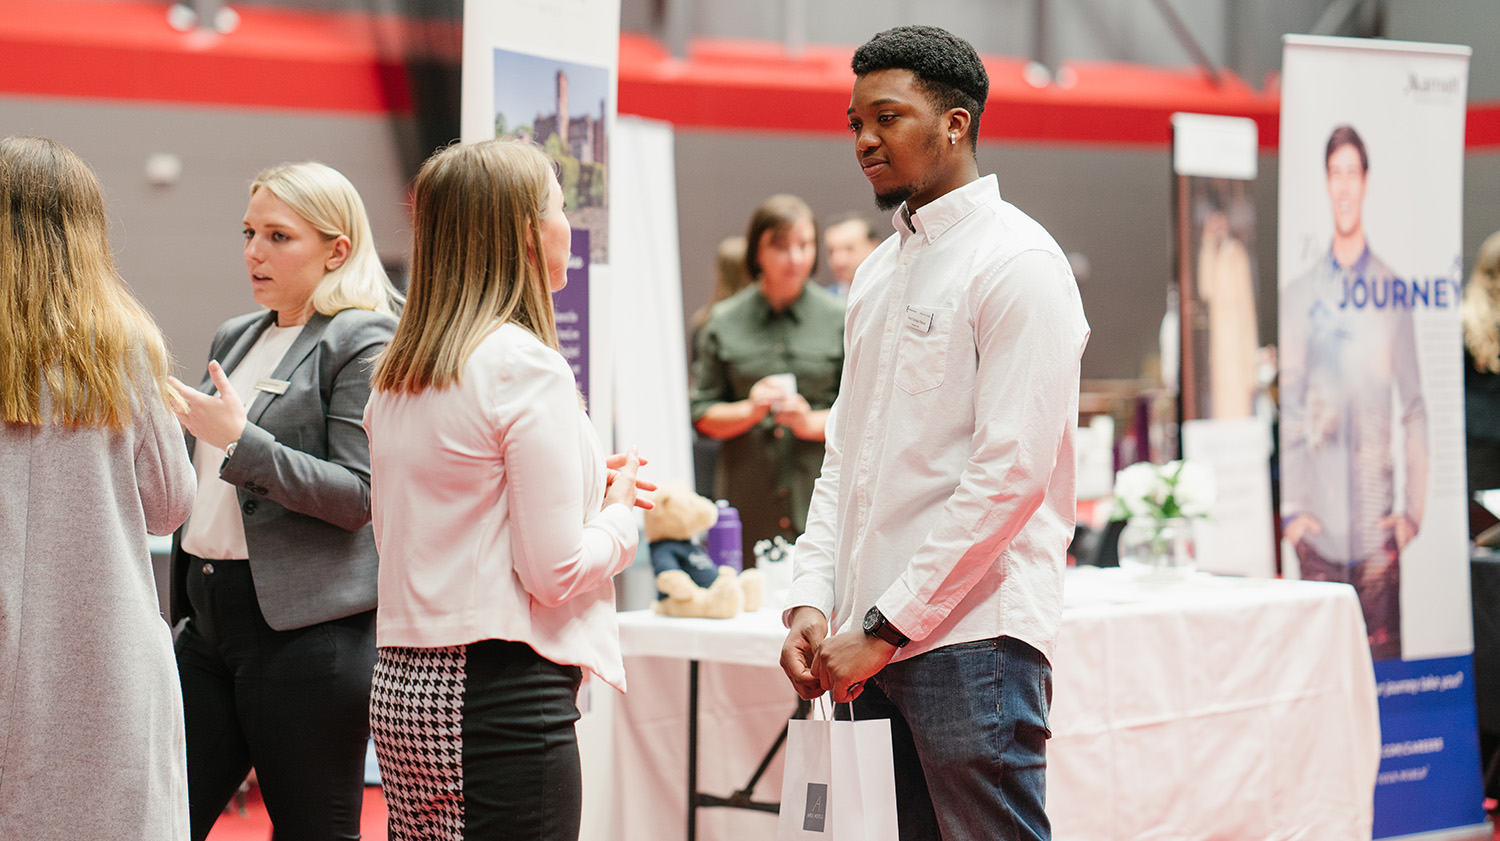 One of our students discussing employability with one of our Careers Fair exhibitors